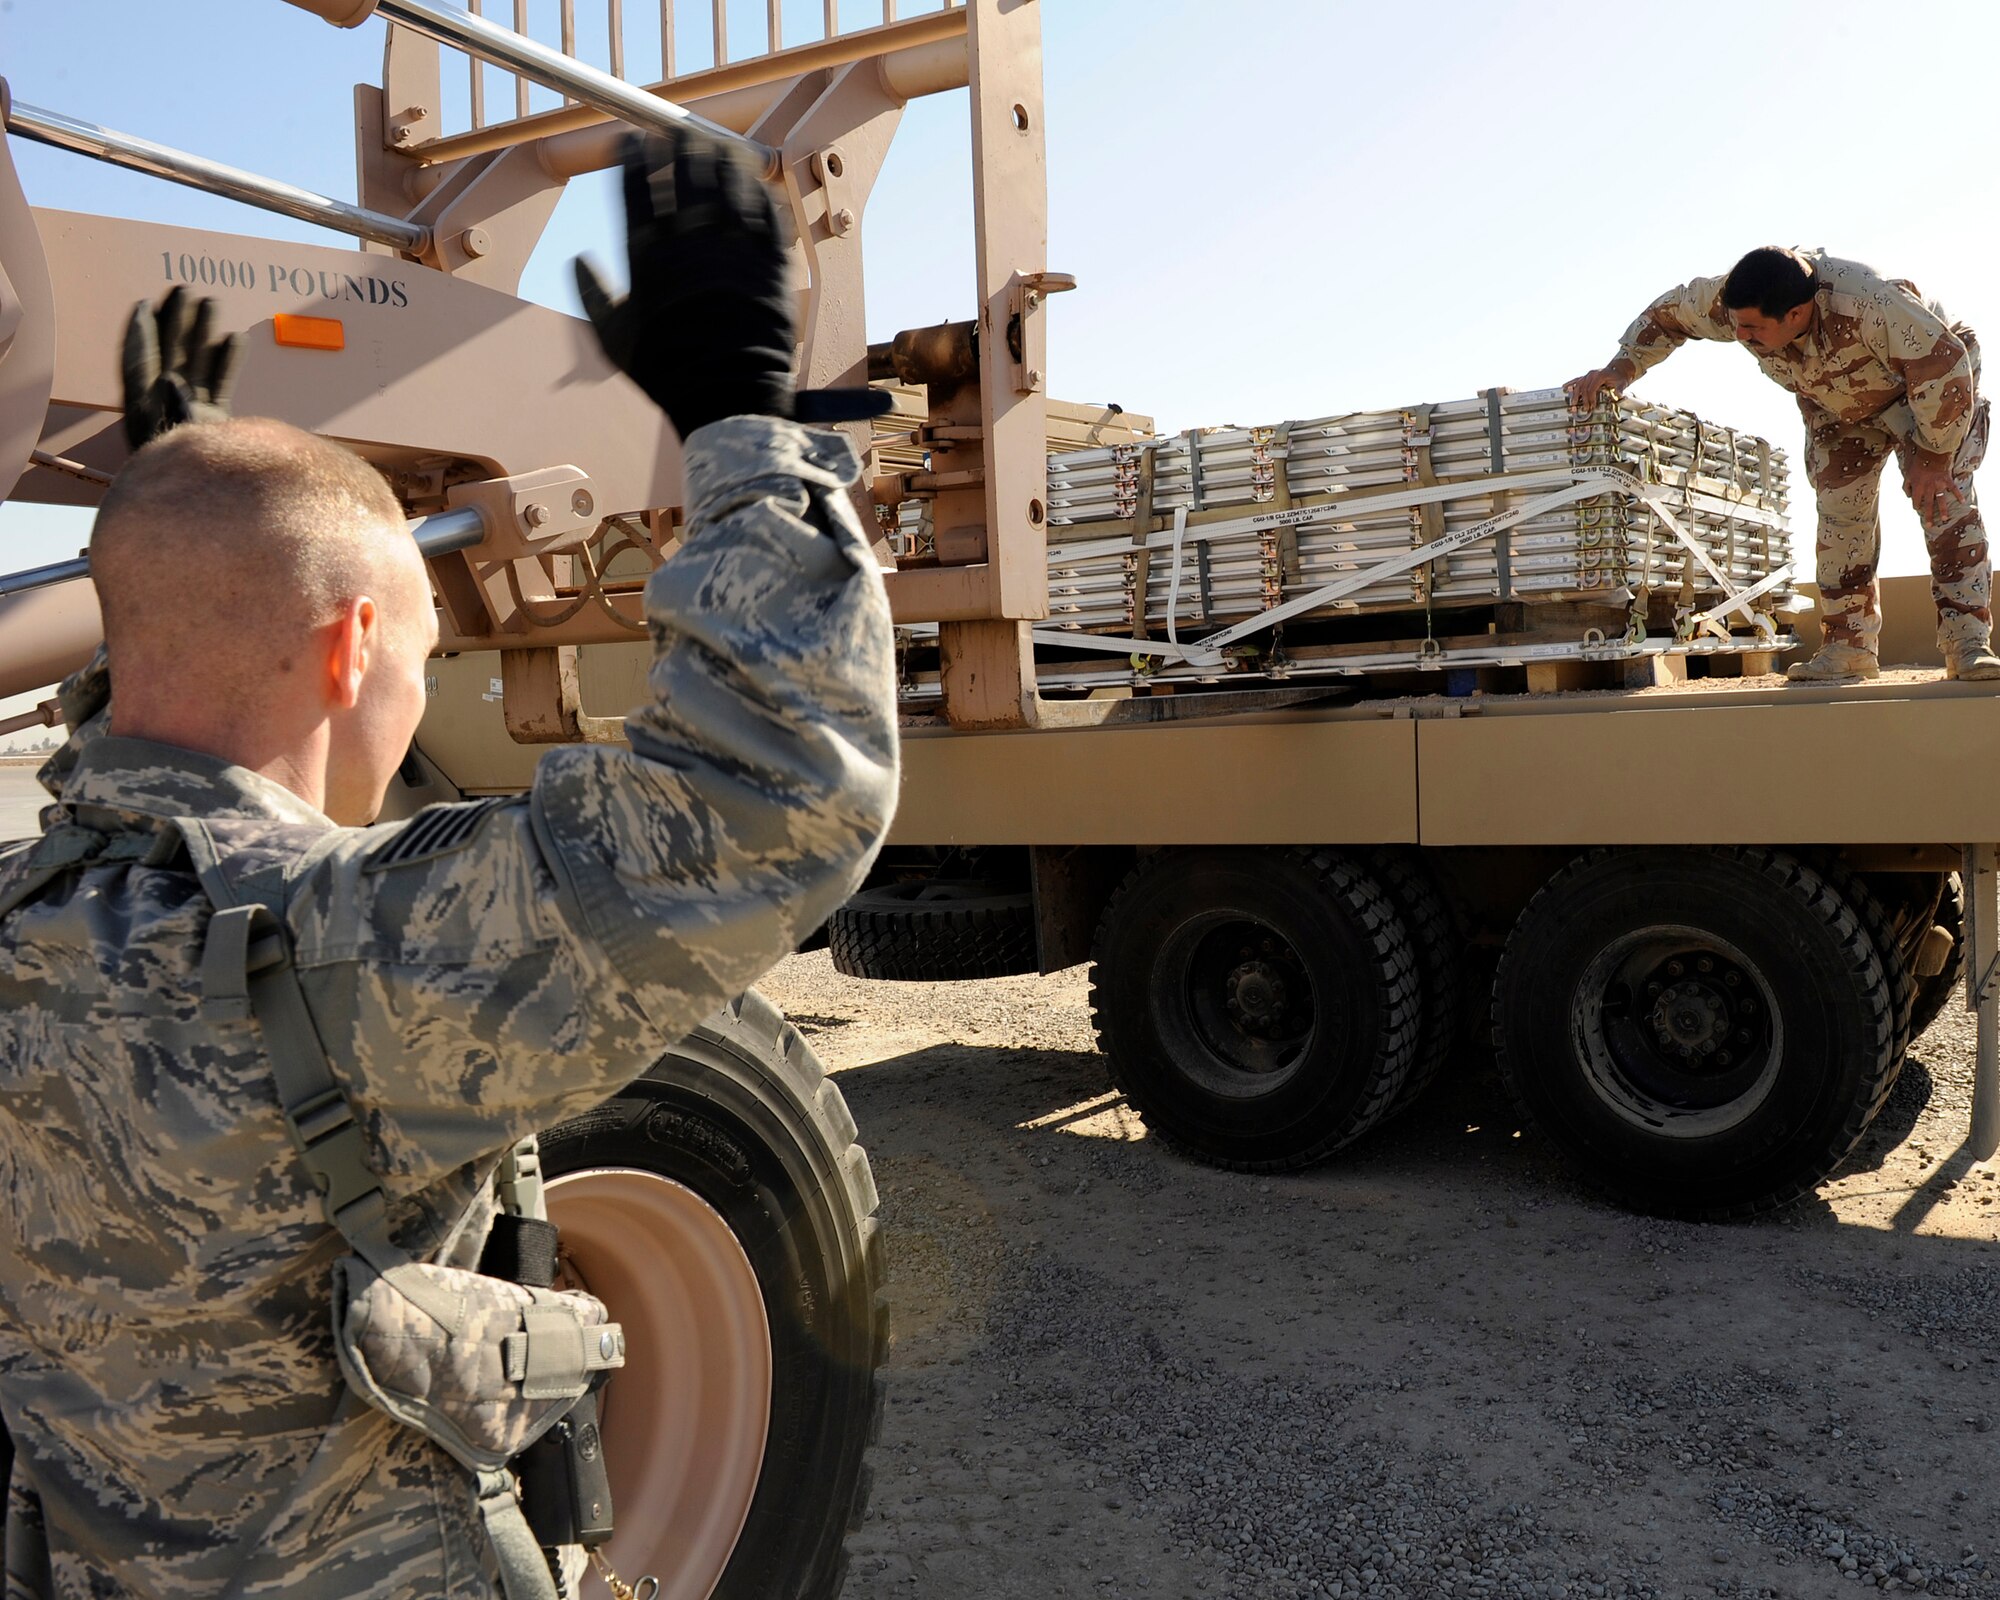 Tech. Sgt. Joshua Hodgin, from the 321st Air Expeditionary Advisory Group, and an Iraqi airman guide a forklift unloading pallets onto a trailer at Sather Air Base, Iraq, Jan. 23, 2009. The pallets are the first delivery to the Iraqi Air Force and are a test of the new logistical readiness system at the Iraqi Air Force?s new Al Muthana Air Base in Baghdad, Iraq. (U.S. Air Force Photo/Senior Airman Jacqueline Romero) 